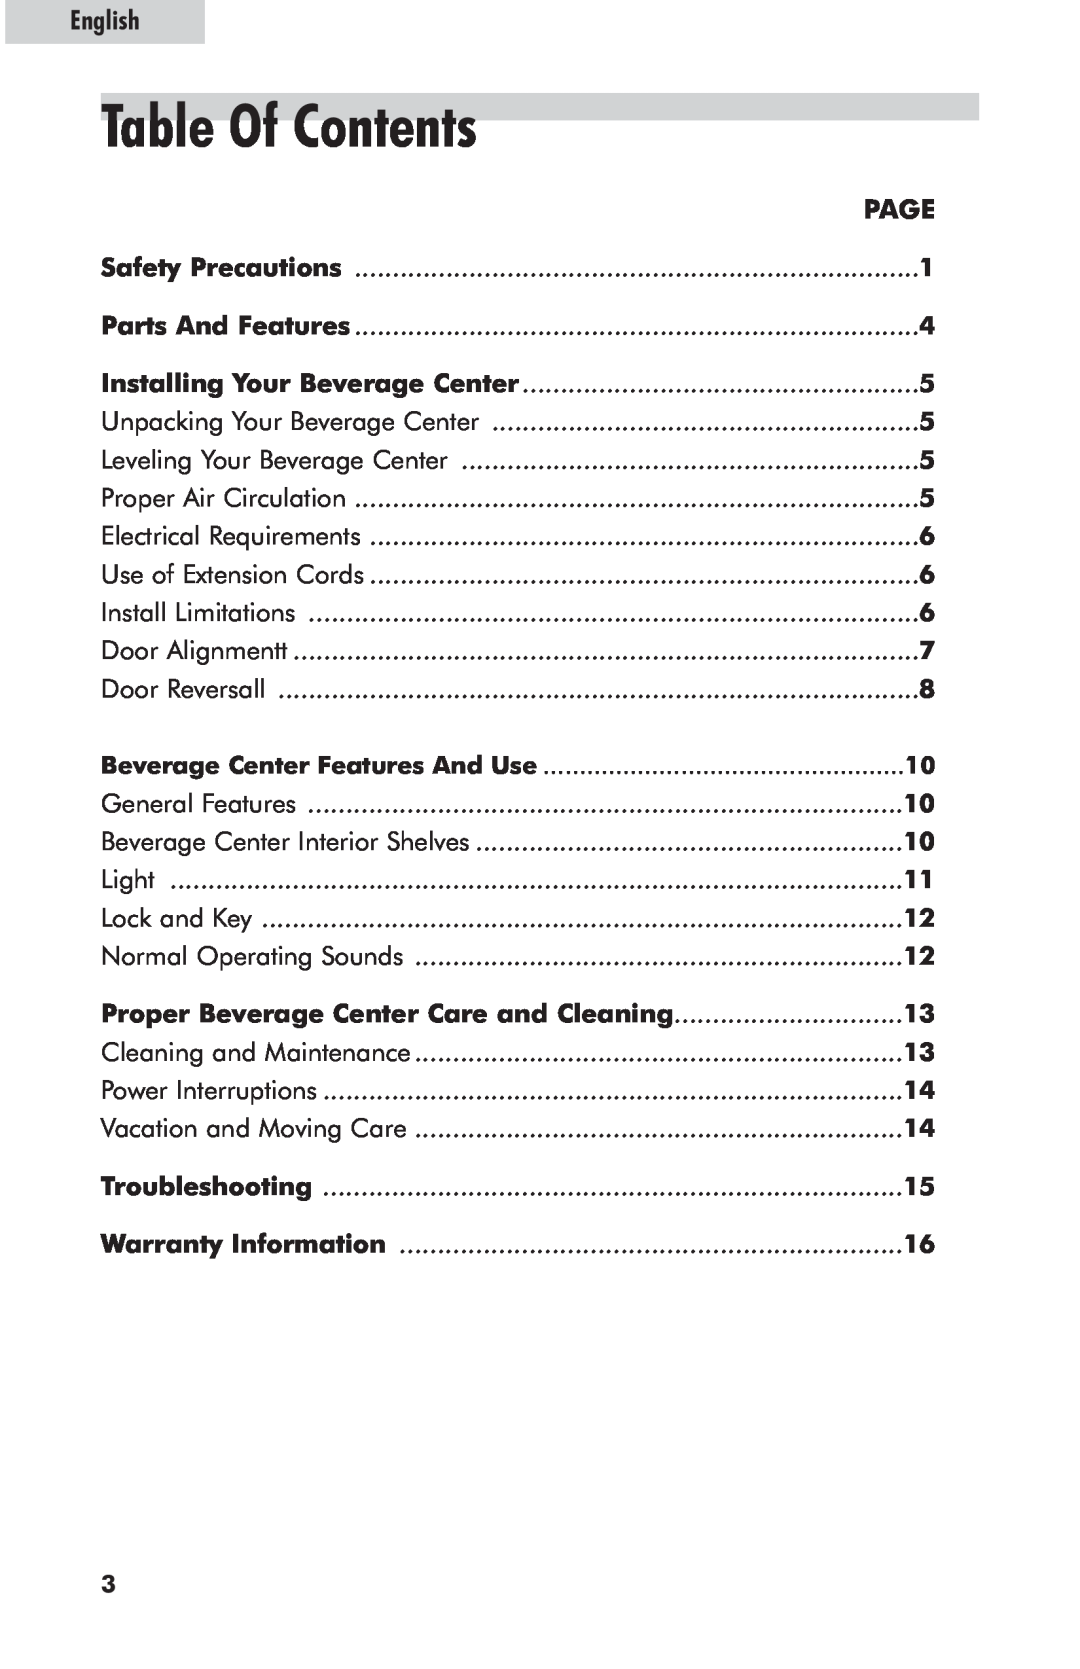 Haier hc125fvs user manual Table Of Contents, English 